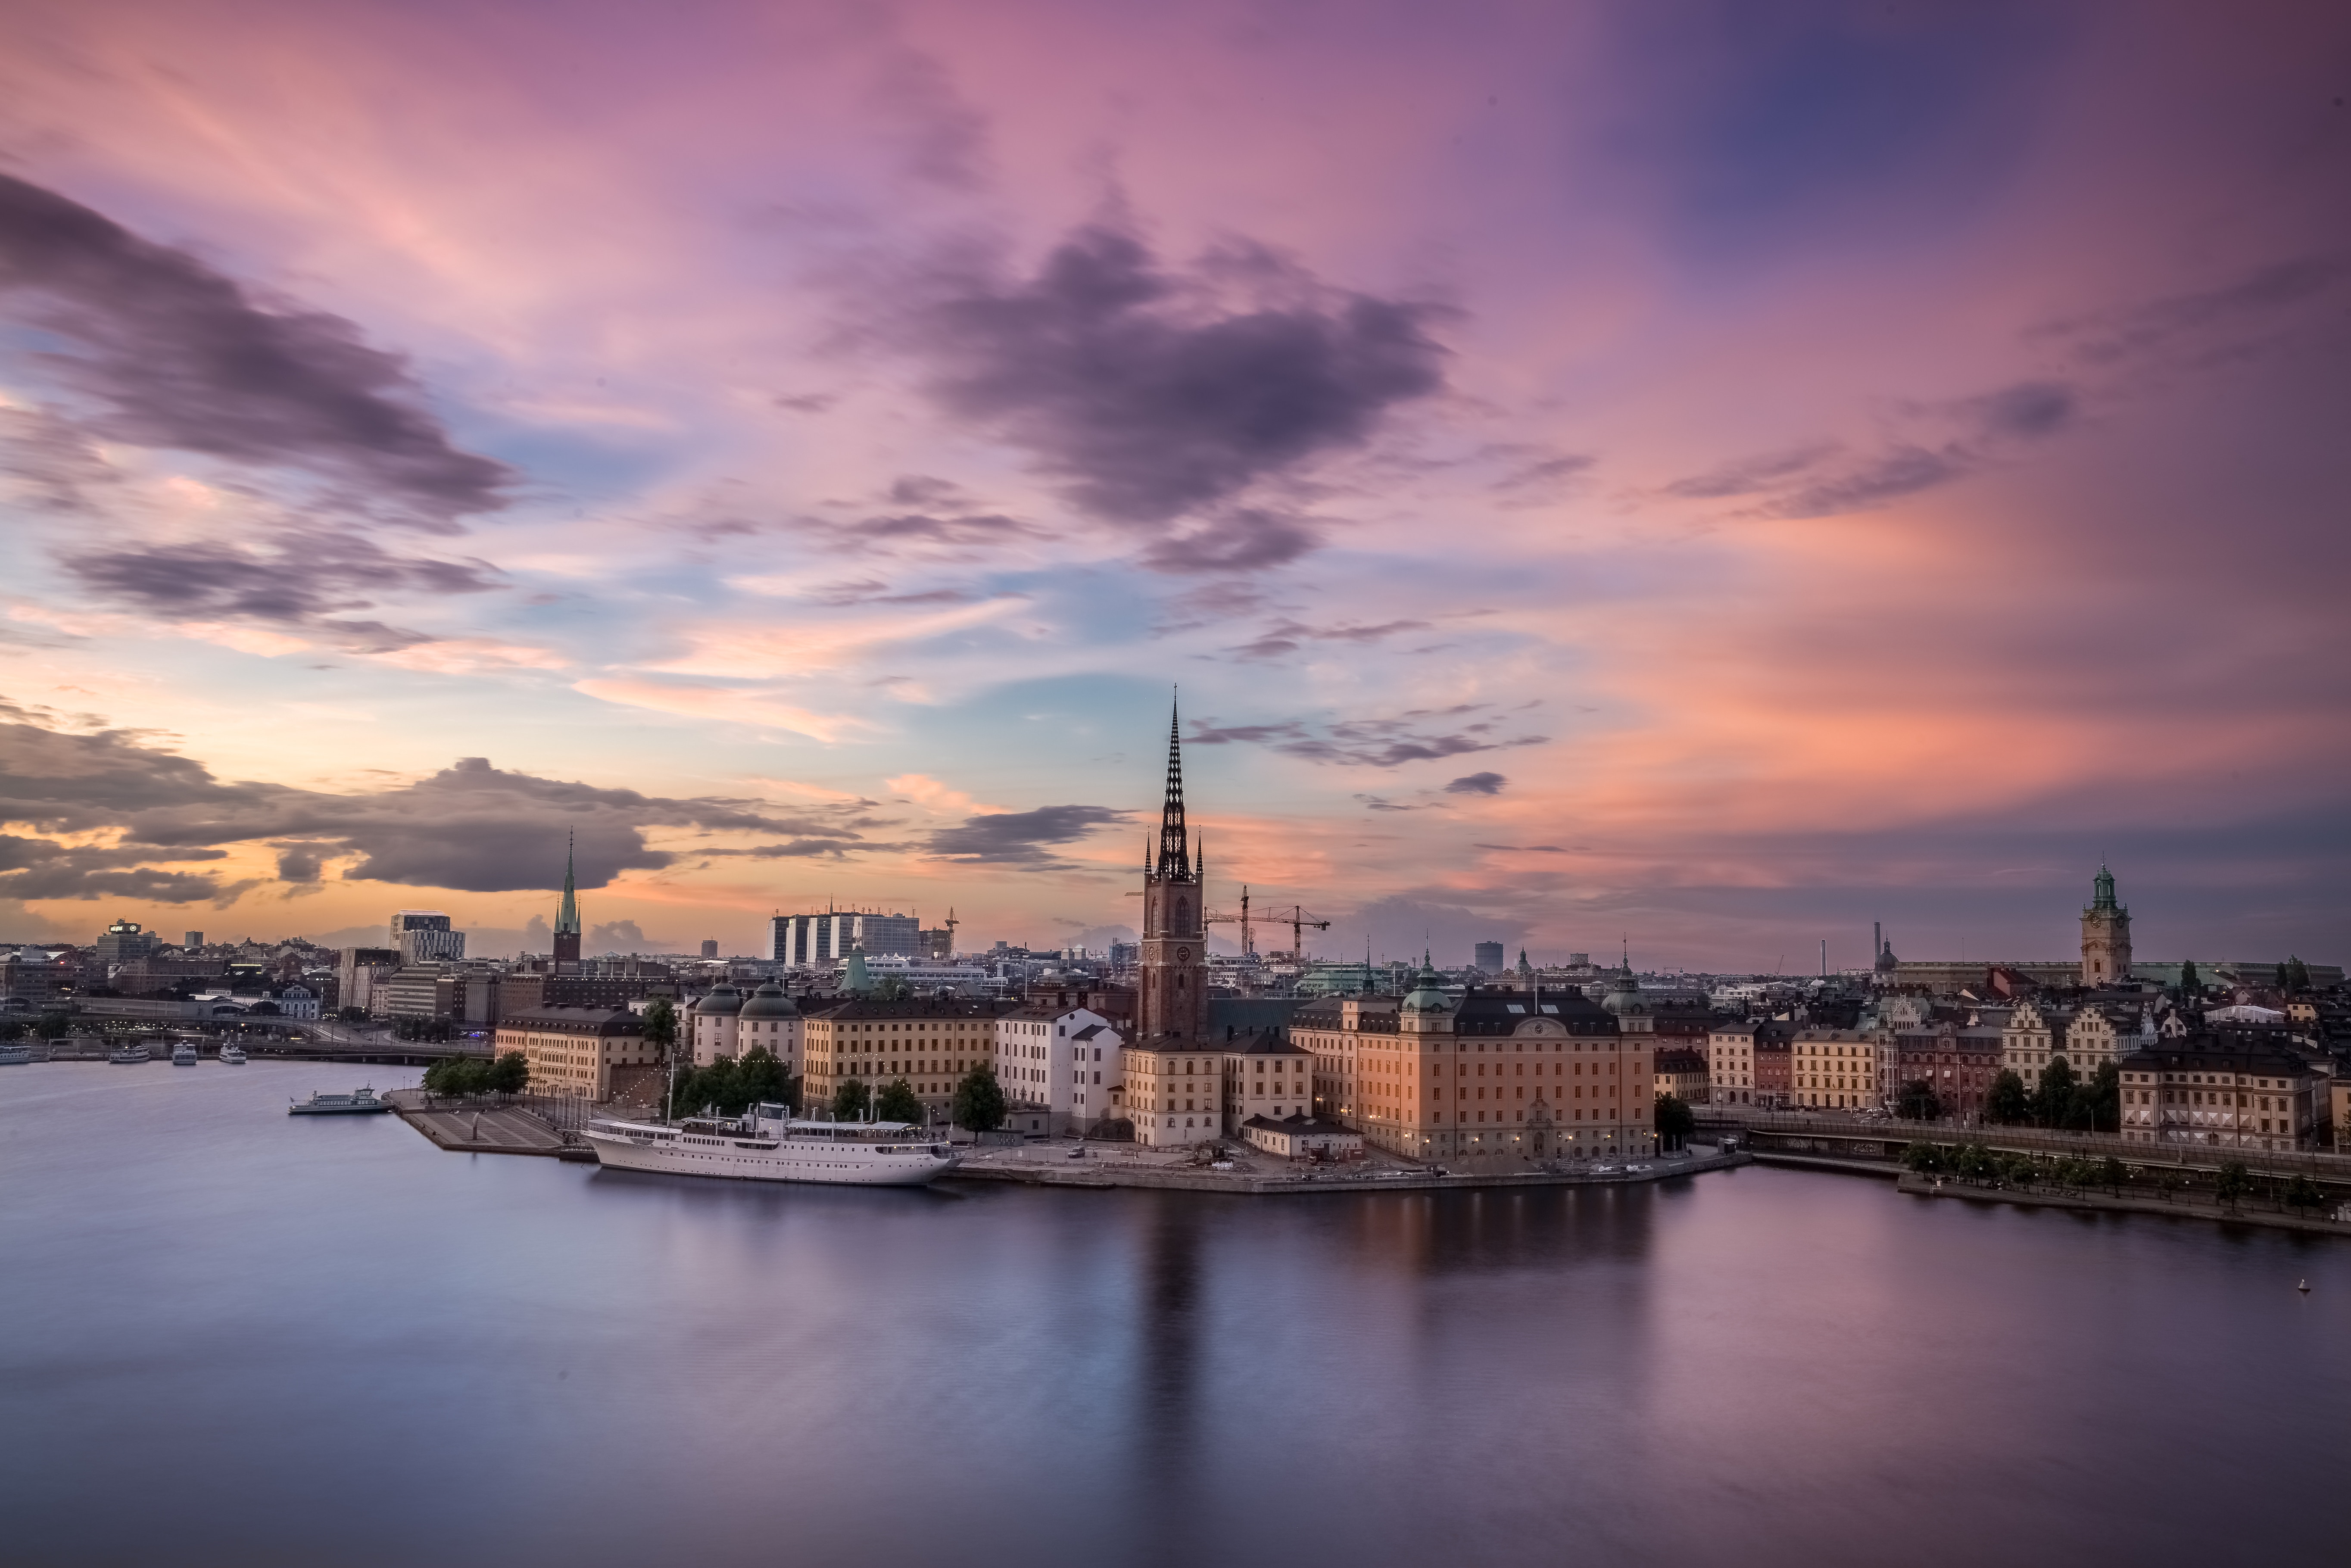 Stockholm against a colourful sky.